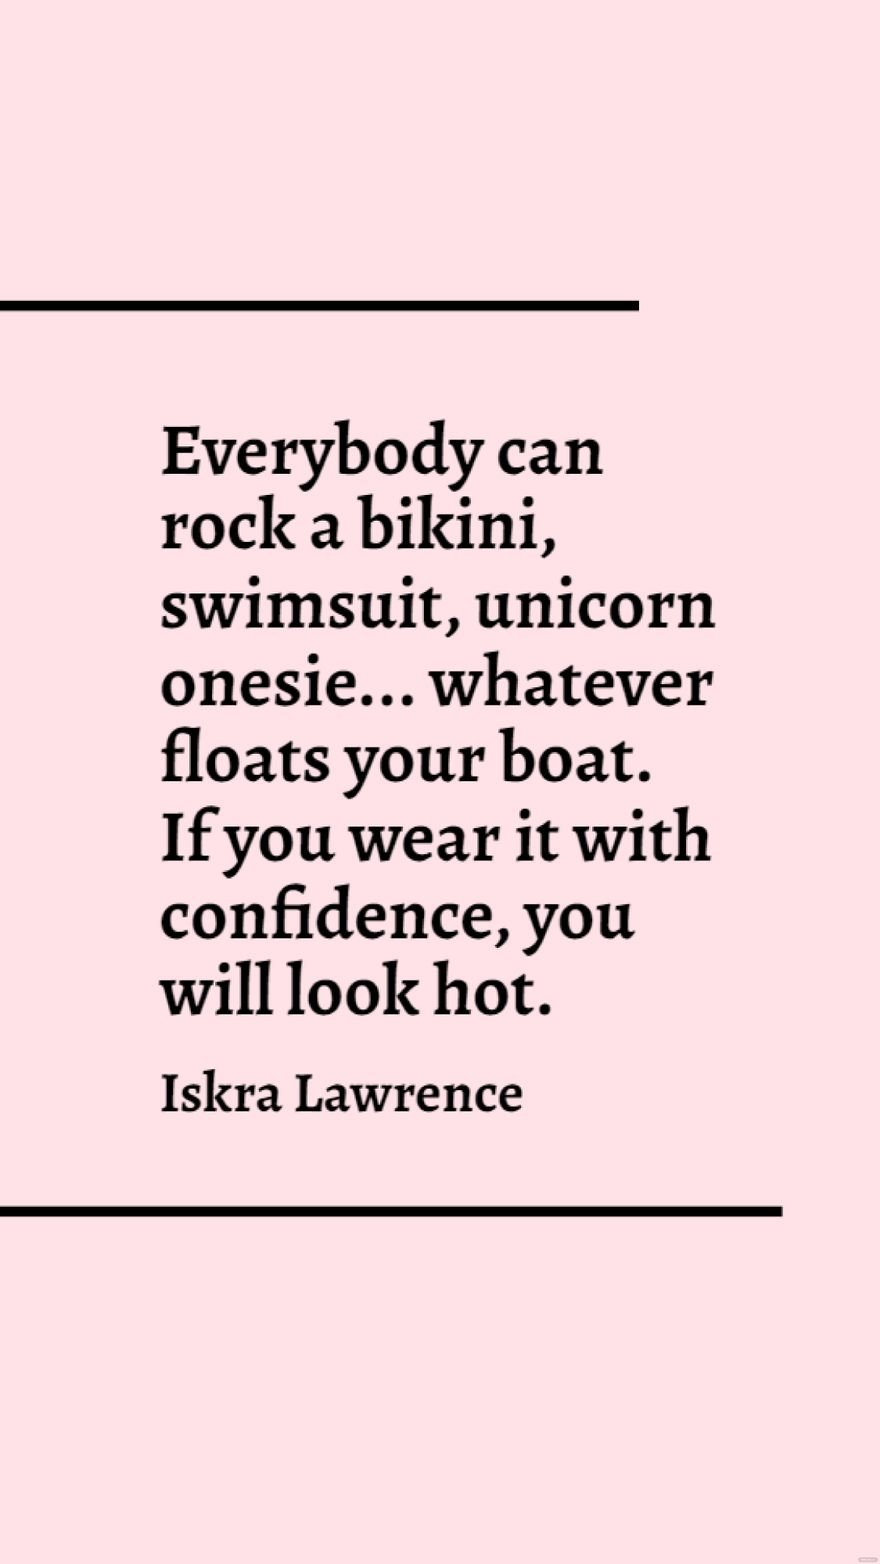 Iskra Lawrence - Everybody can rock a bikini, swimsuit, unicorn onesie... whatever floats your boat. If you wear it with confidence, you will look hot. in JPG